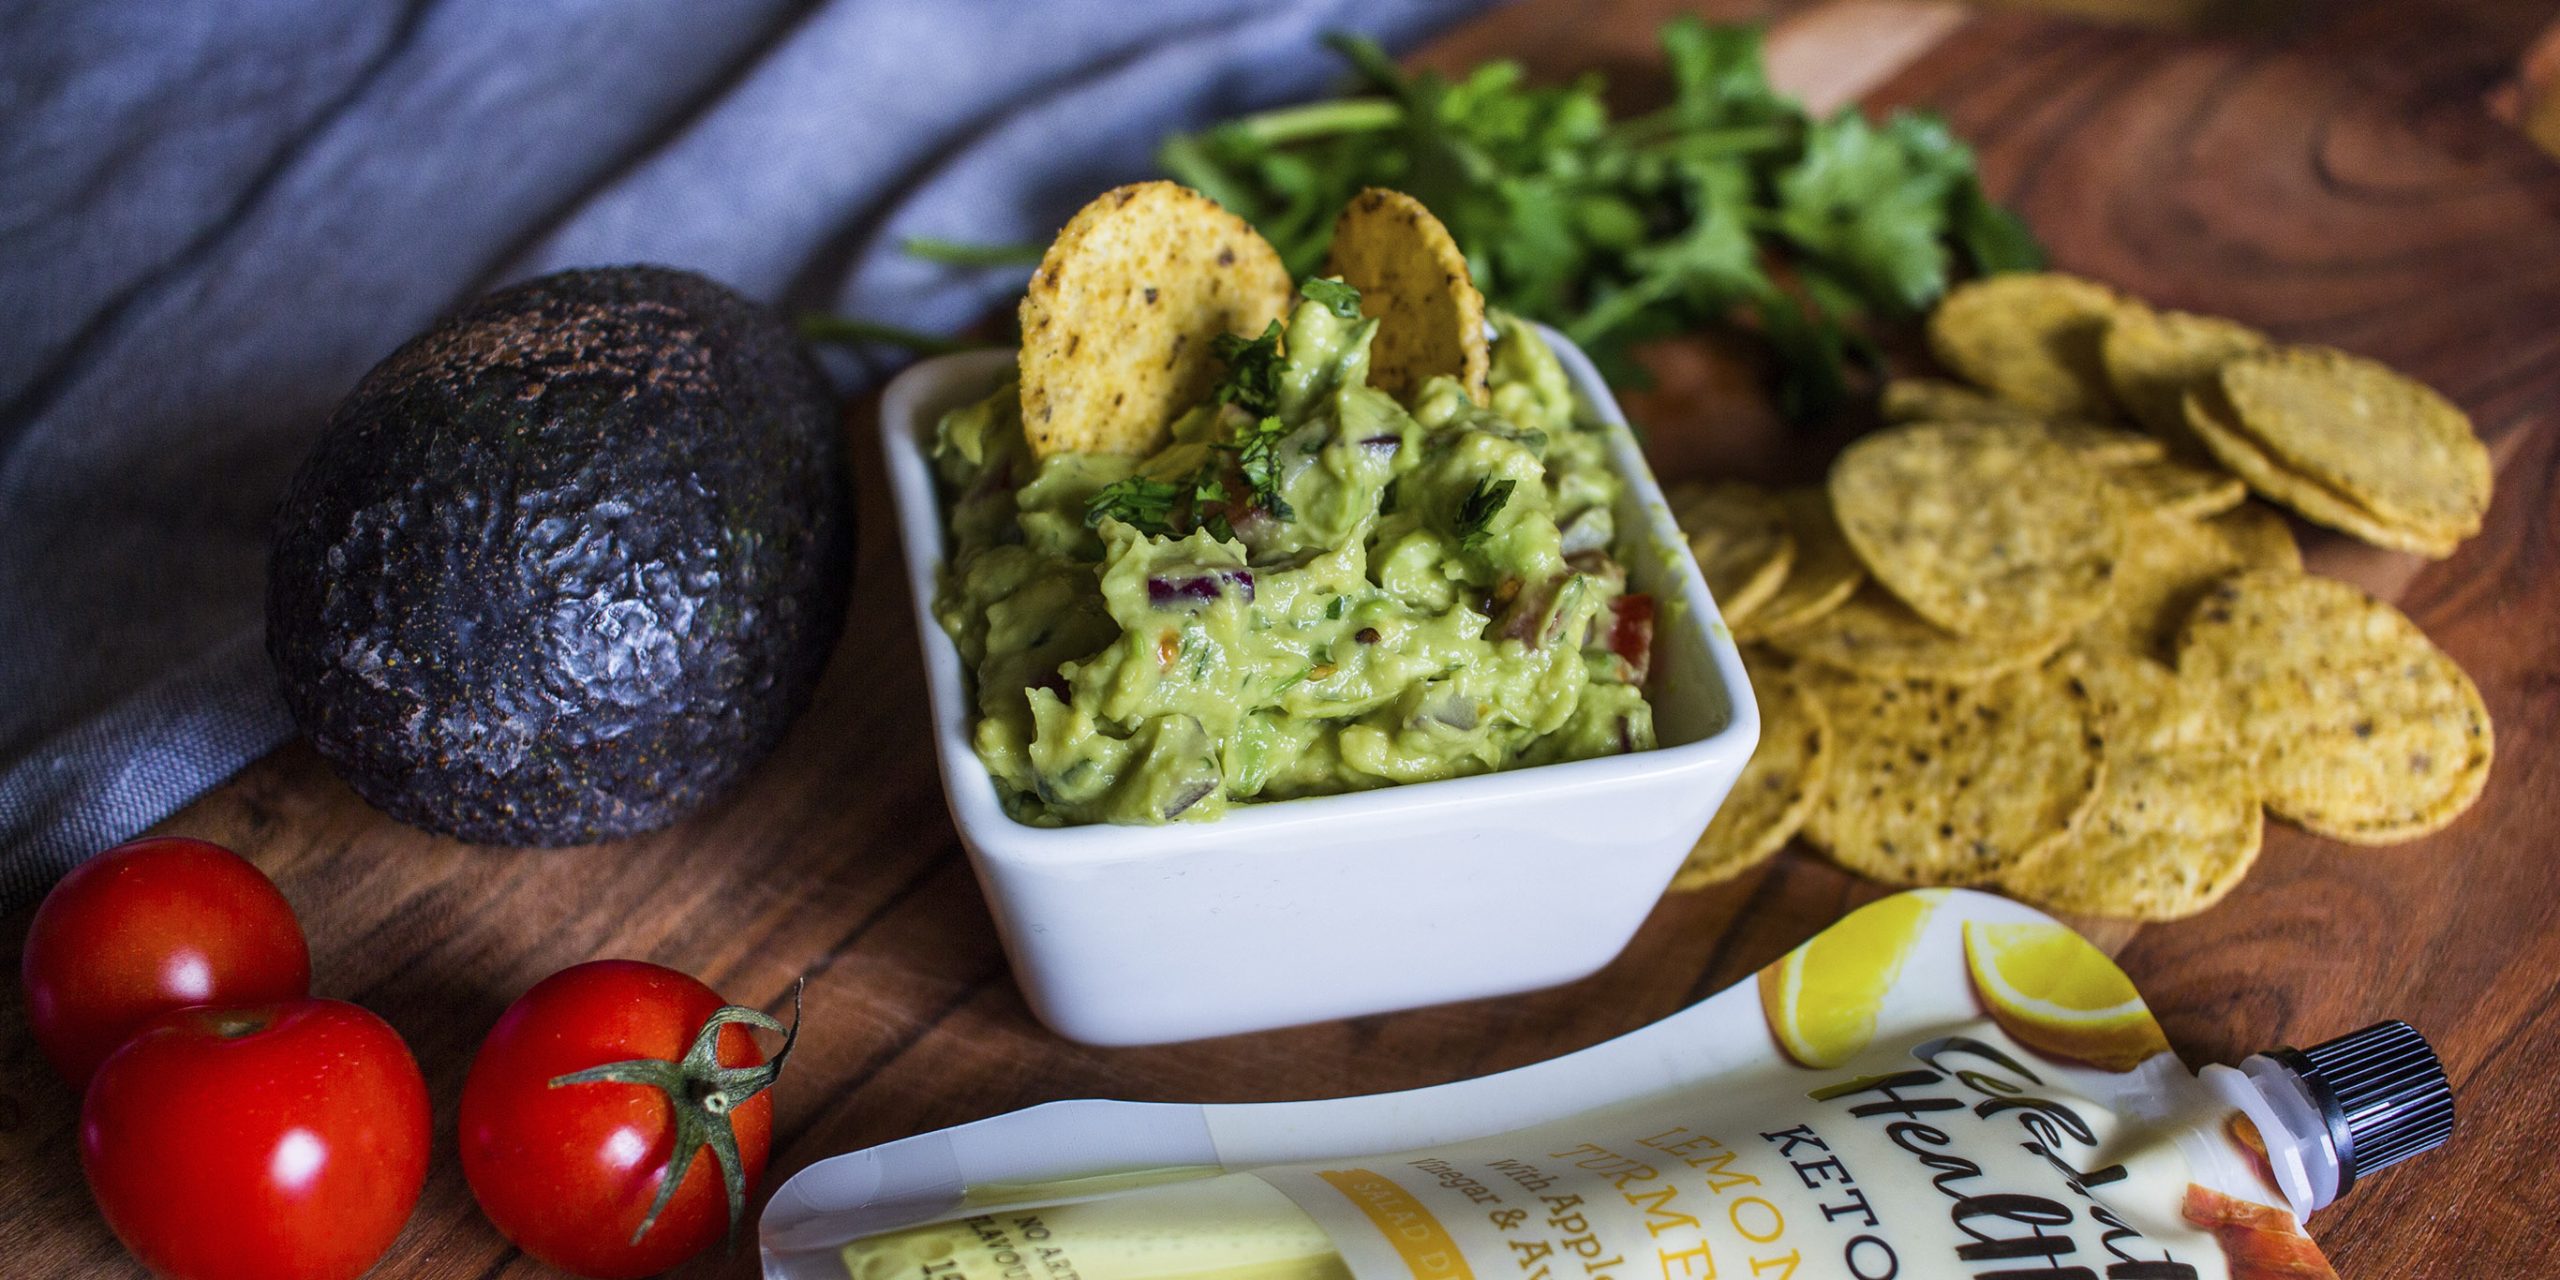 Health snack ideas like this delicious guacamole with corn chips